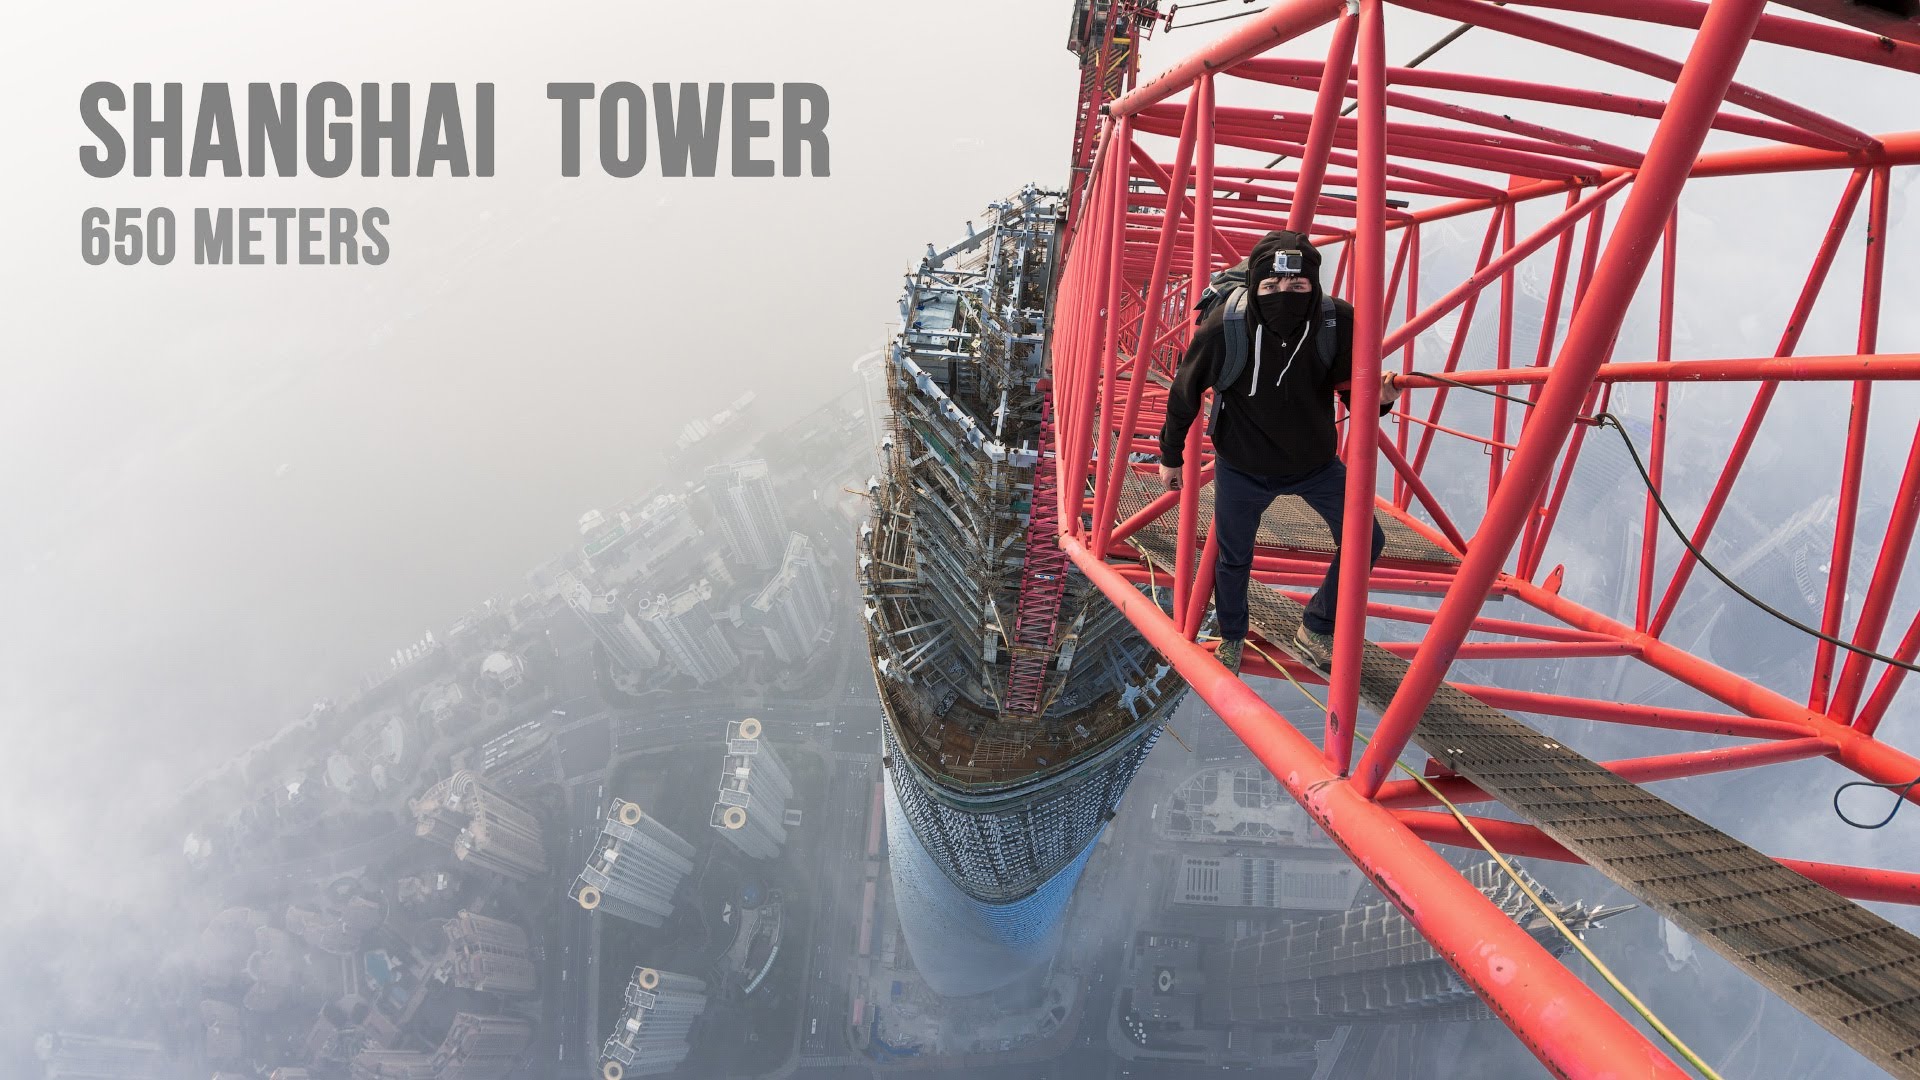 Scaling China's tallest building